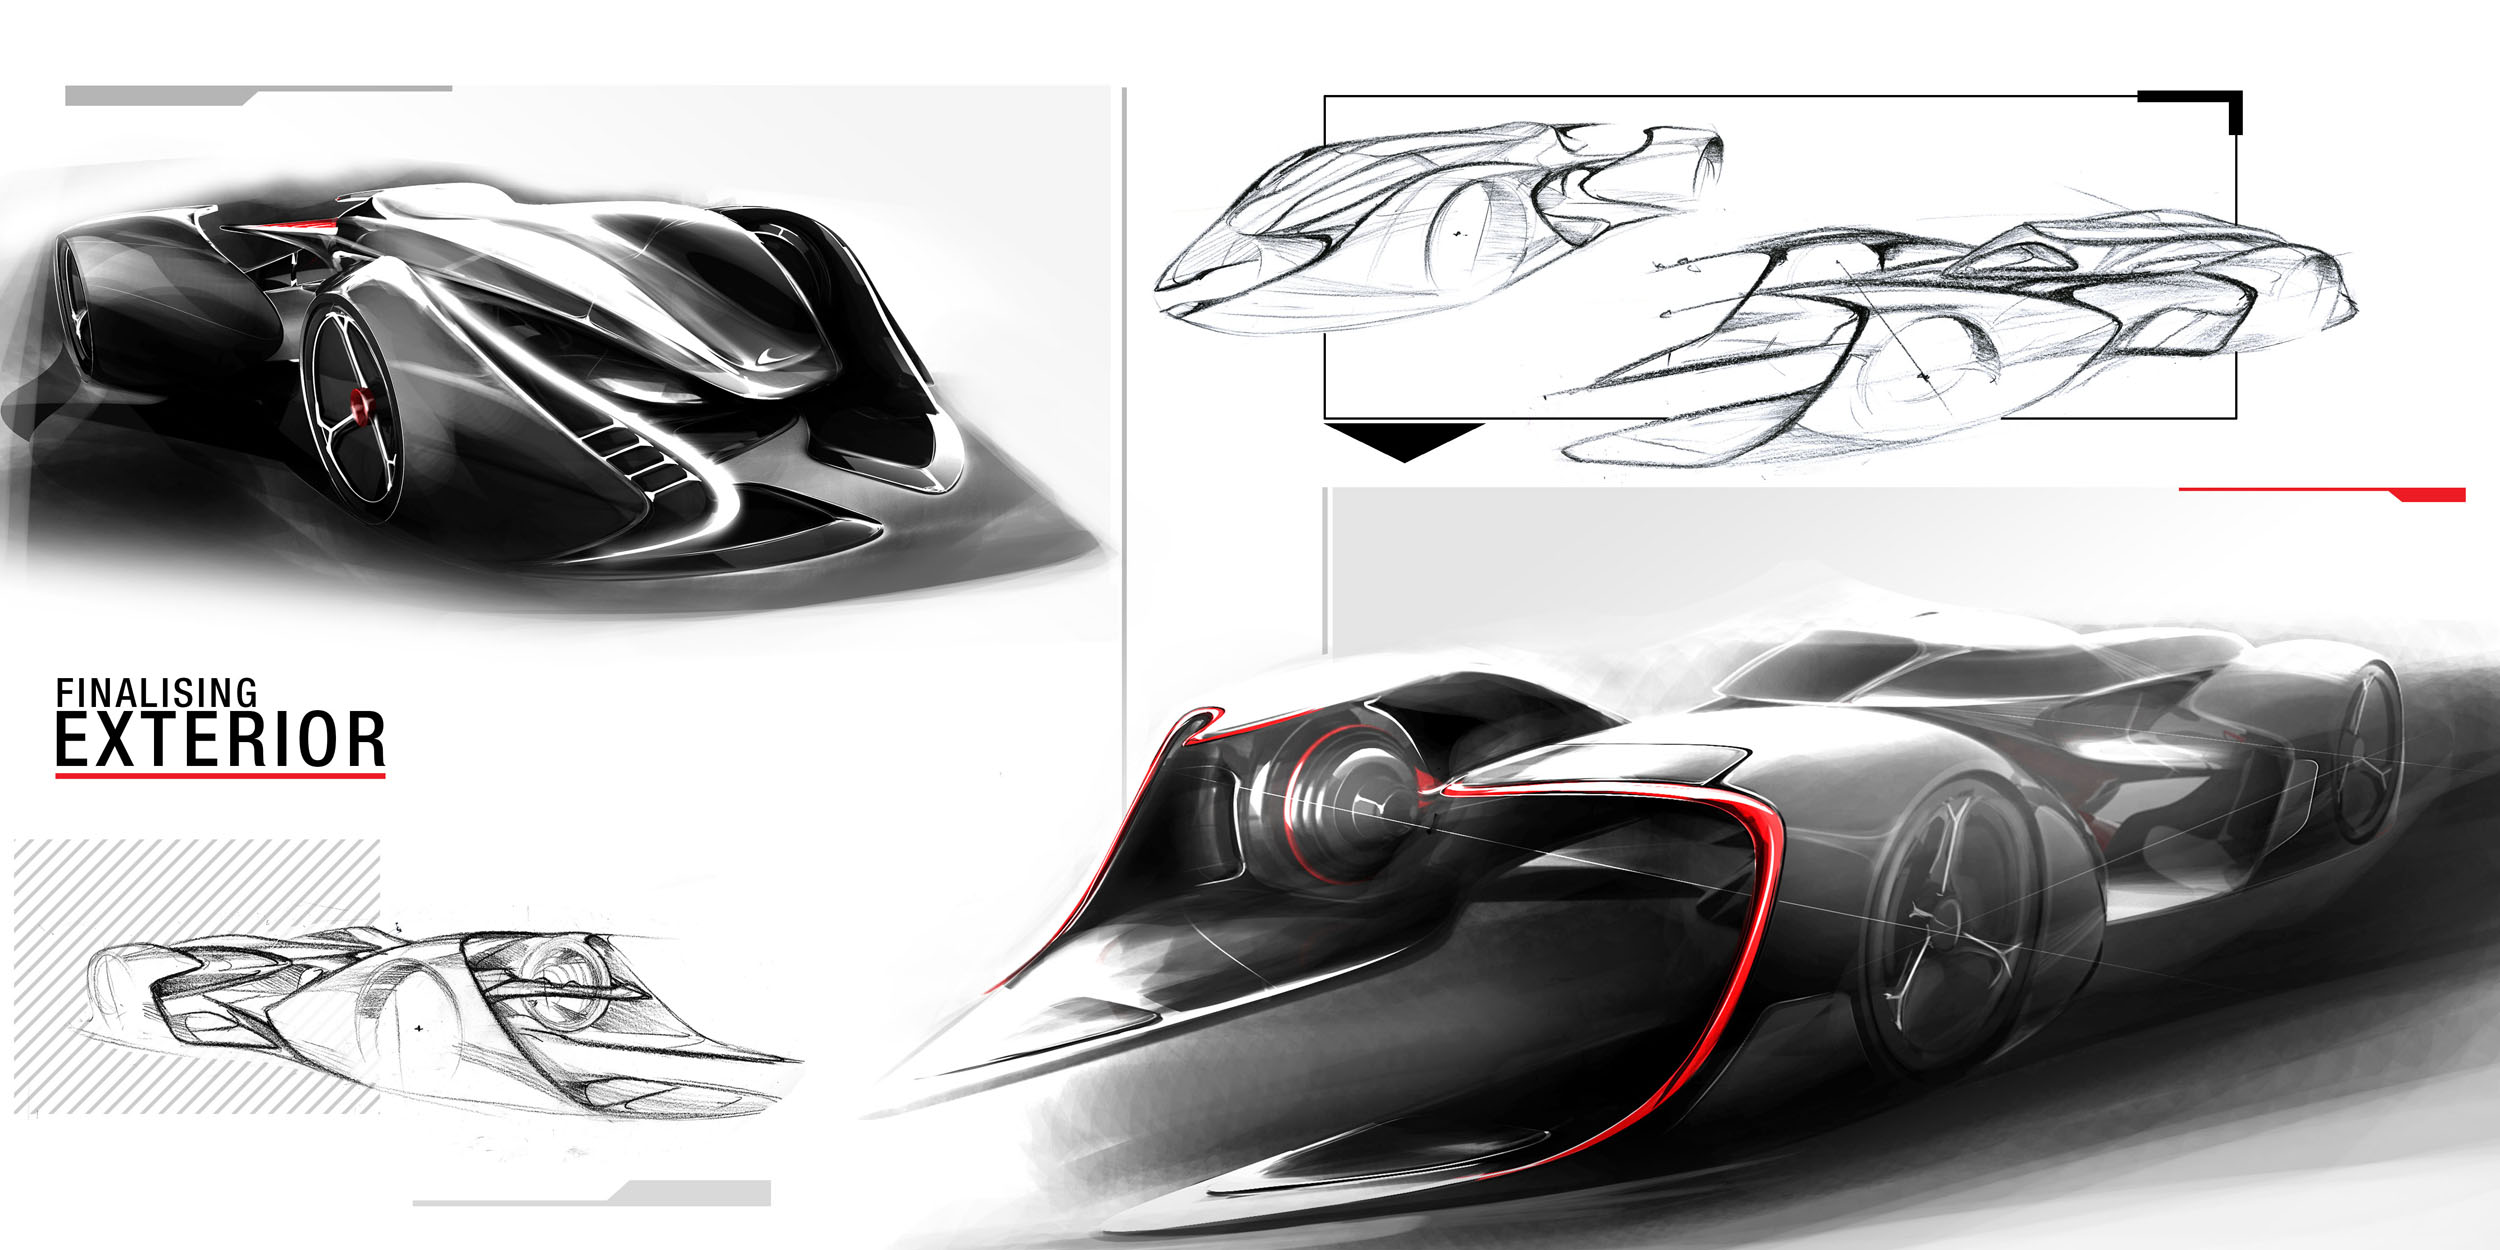 Futuristic McLaren Motorsports Spirit Concept Car for The Year of 2040 and Beyond - Tuvie